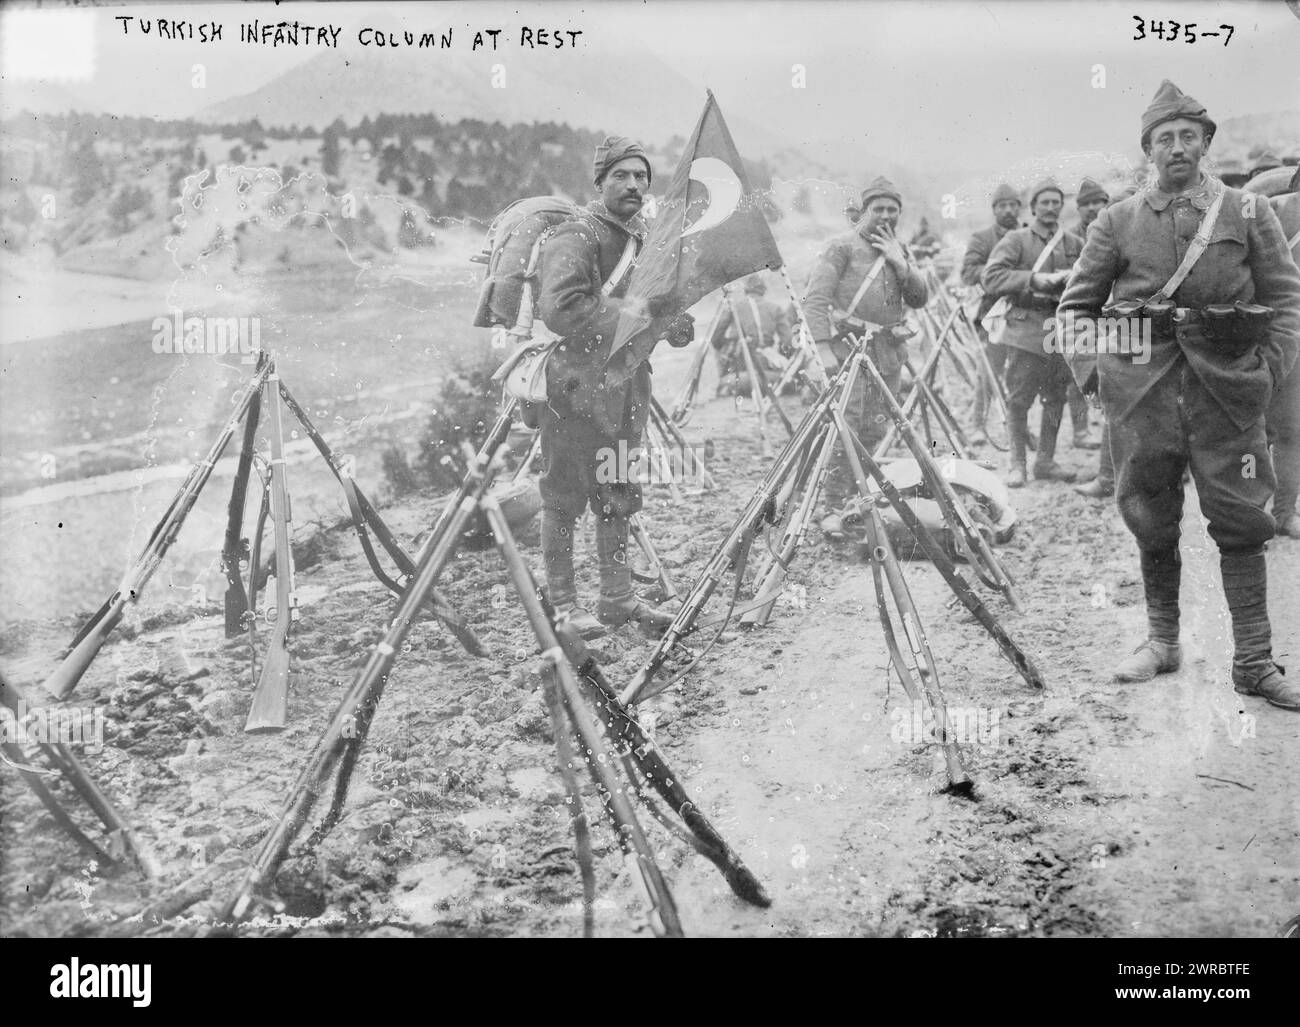 Turkish Infantry Column at rest, Photograph shows Turkish (Ottoman Empire) soldiers with flag and rifles during World War I., between ca. 1914 and ca. 1915, World War, 1914-1918, Glass negatives, 1 negative: glass Stock Photo